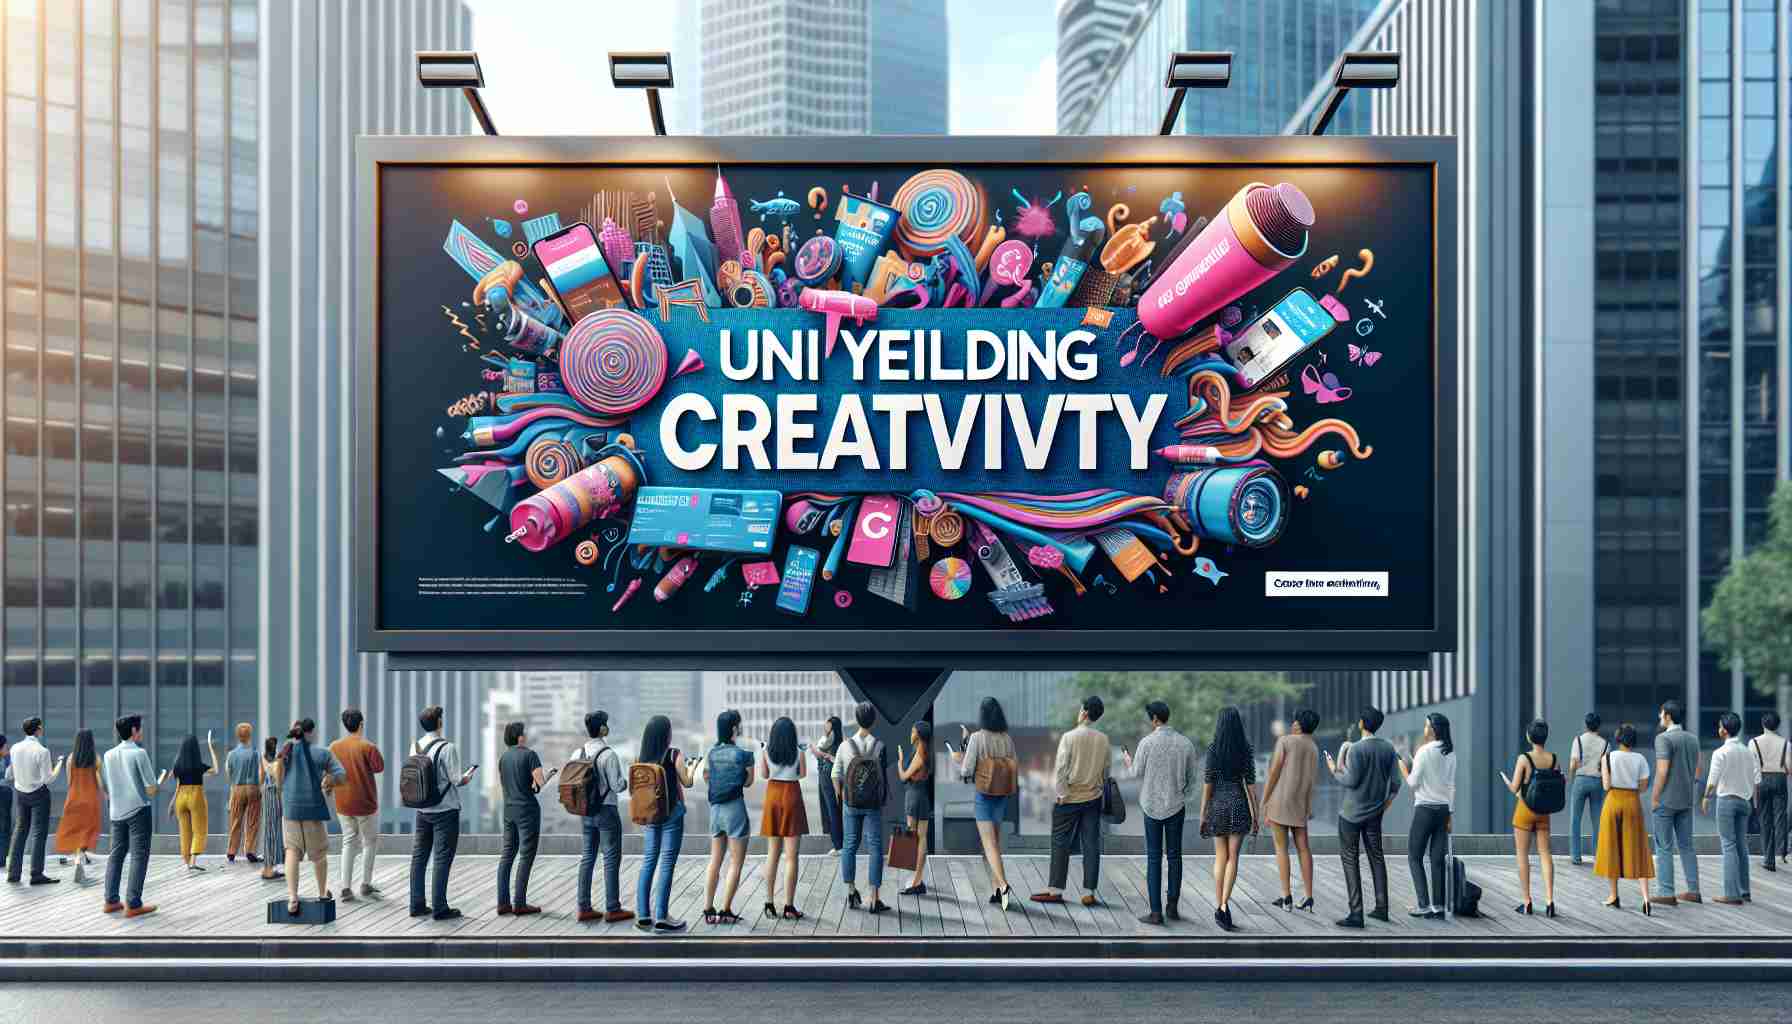 Samsung Celebrates Unyielding Creativity with New Advertising Campaign